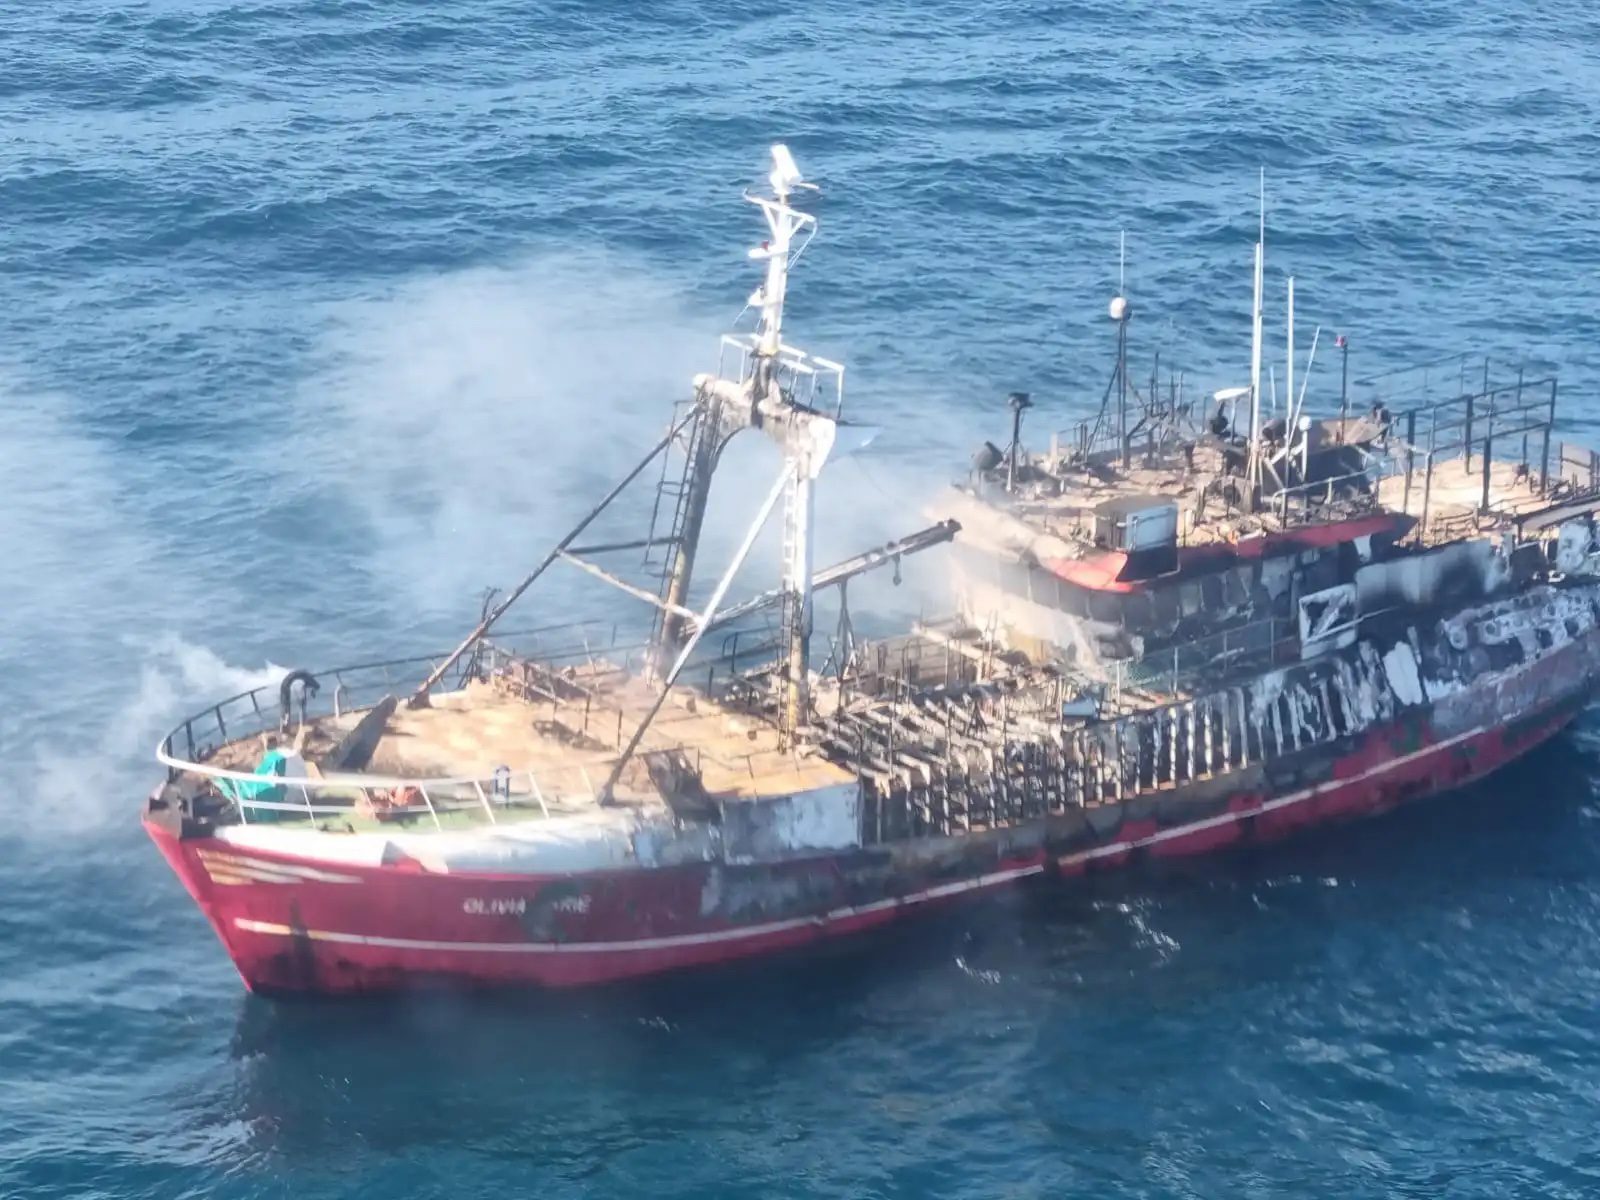 Salvage Operation Begins to Recover Stricken Fishing Vessel South of Cape Town